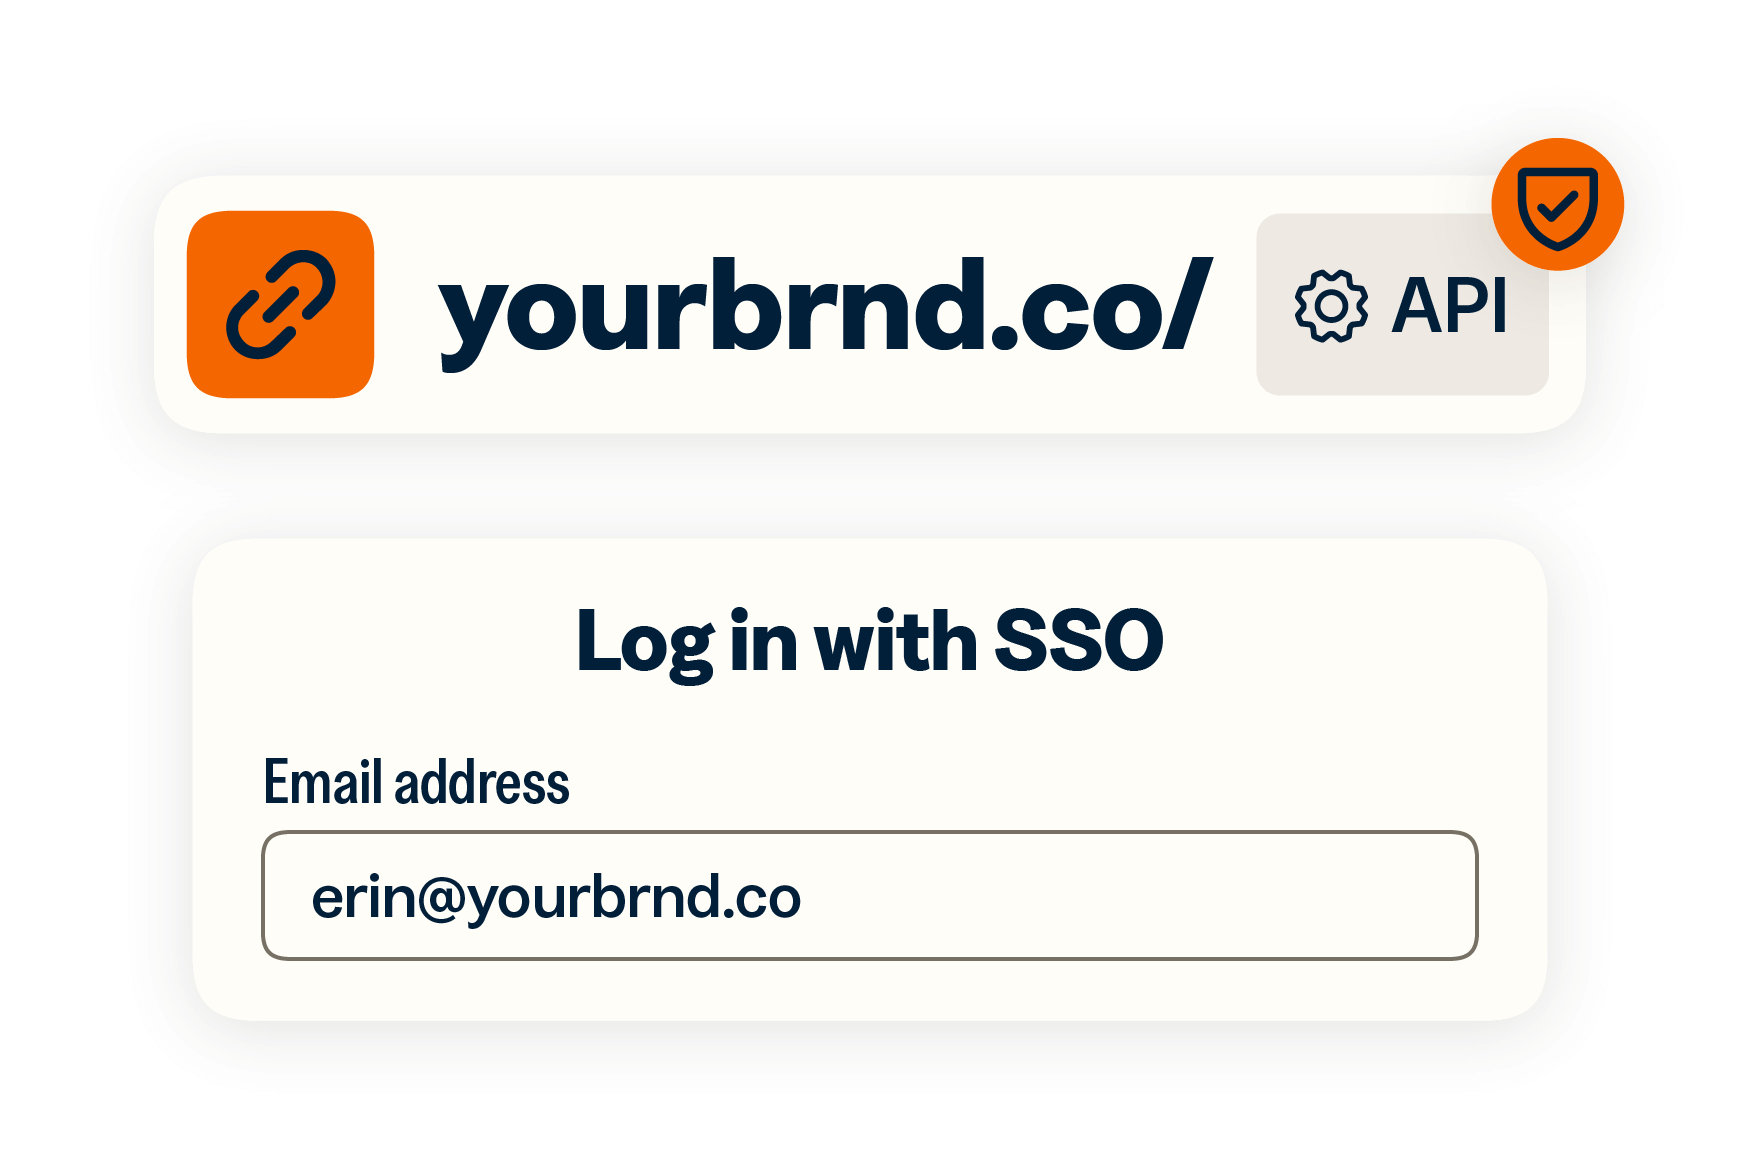 Short link with SSO login screen